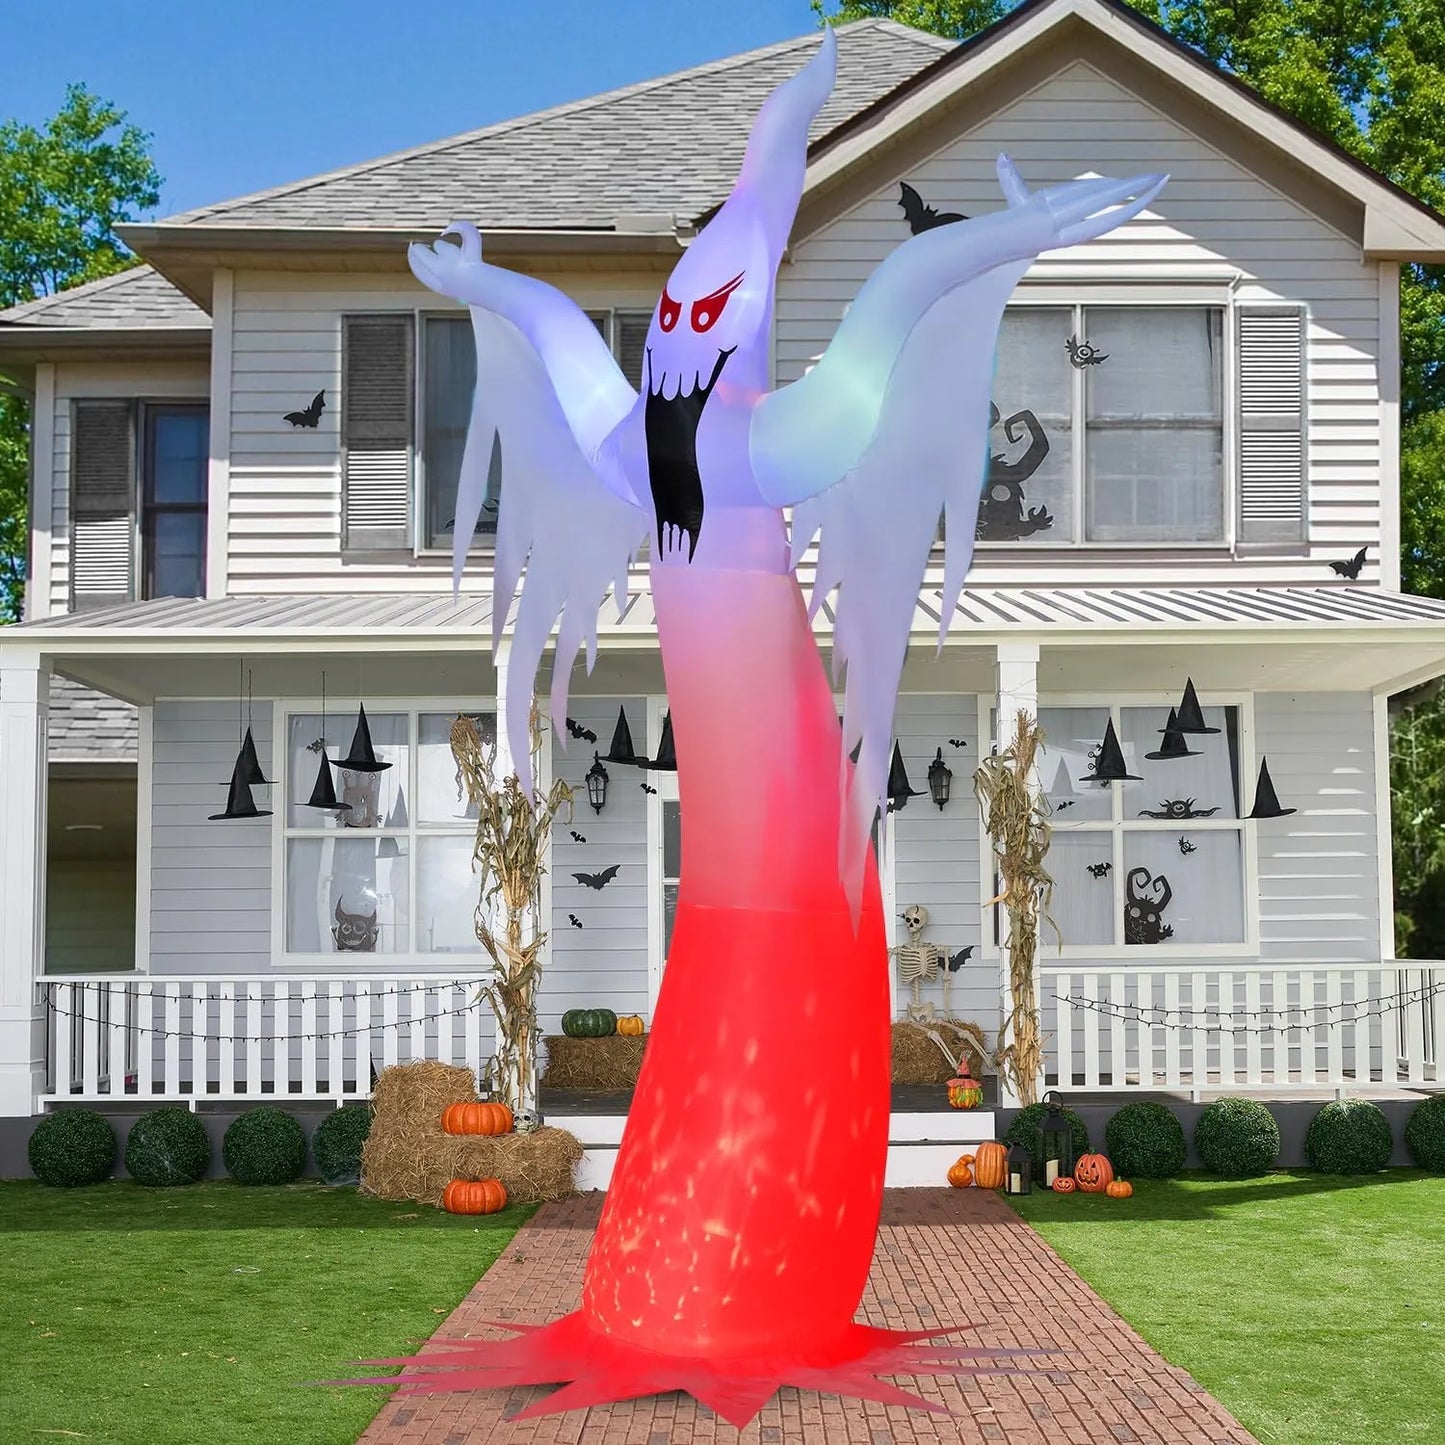 Joiedomi 12.5ft Tall Halloween Inflatable Ghost with Built-in Colorful LEDs